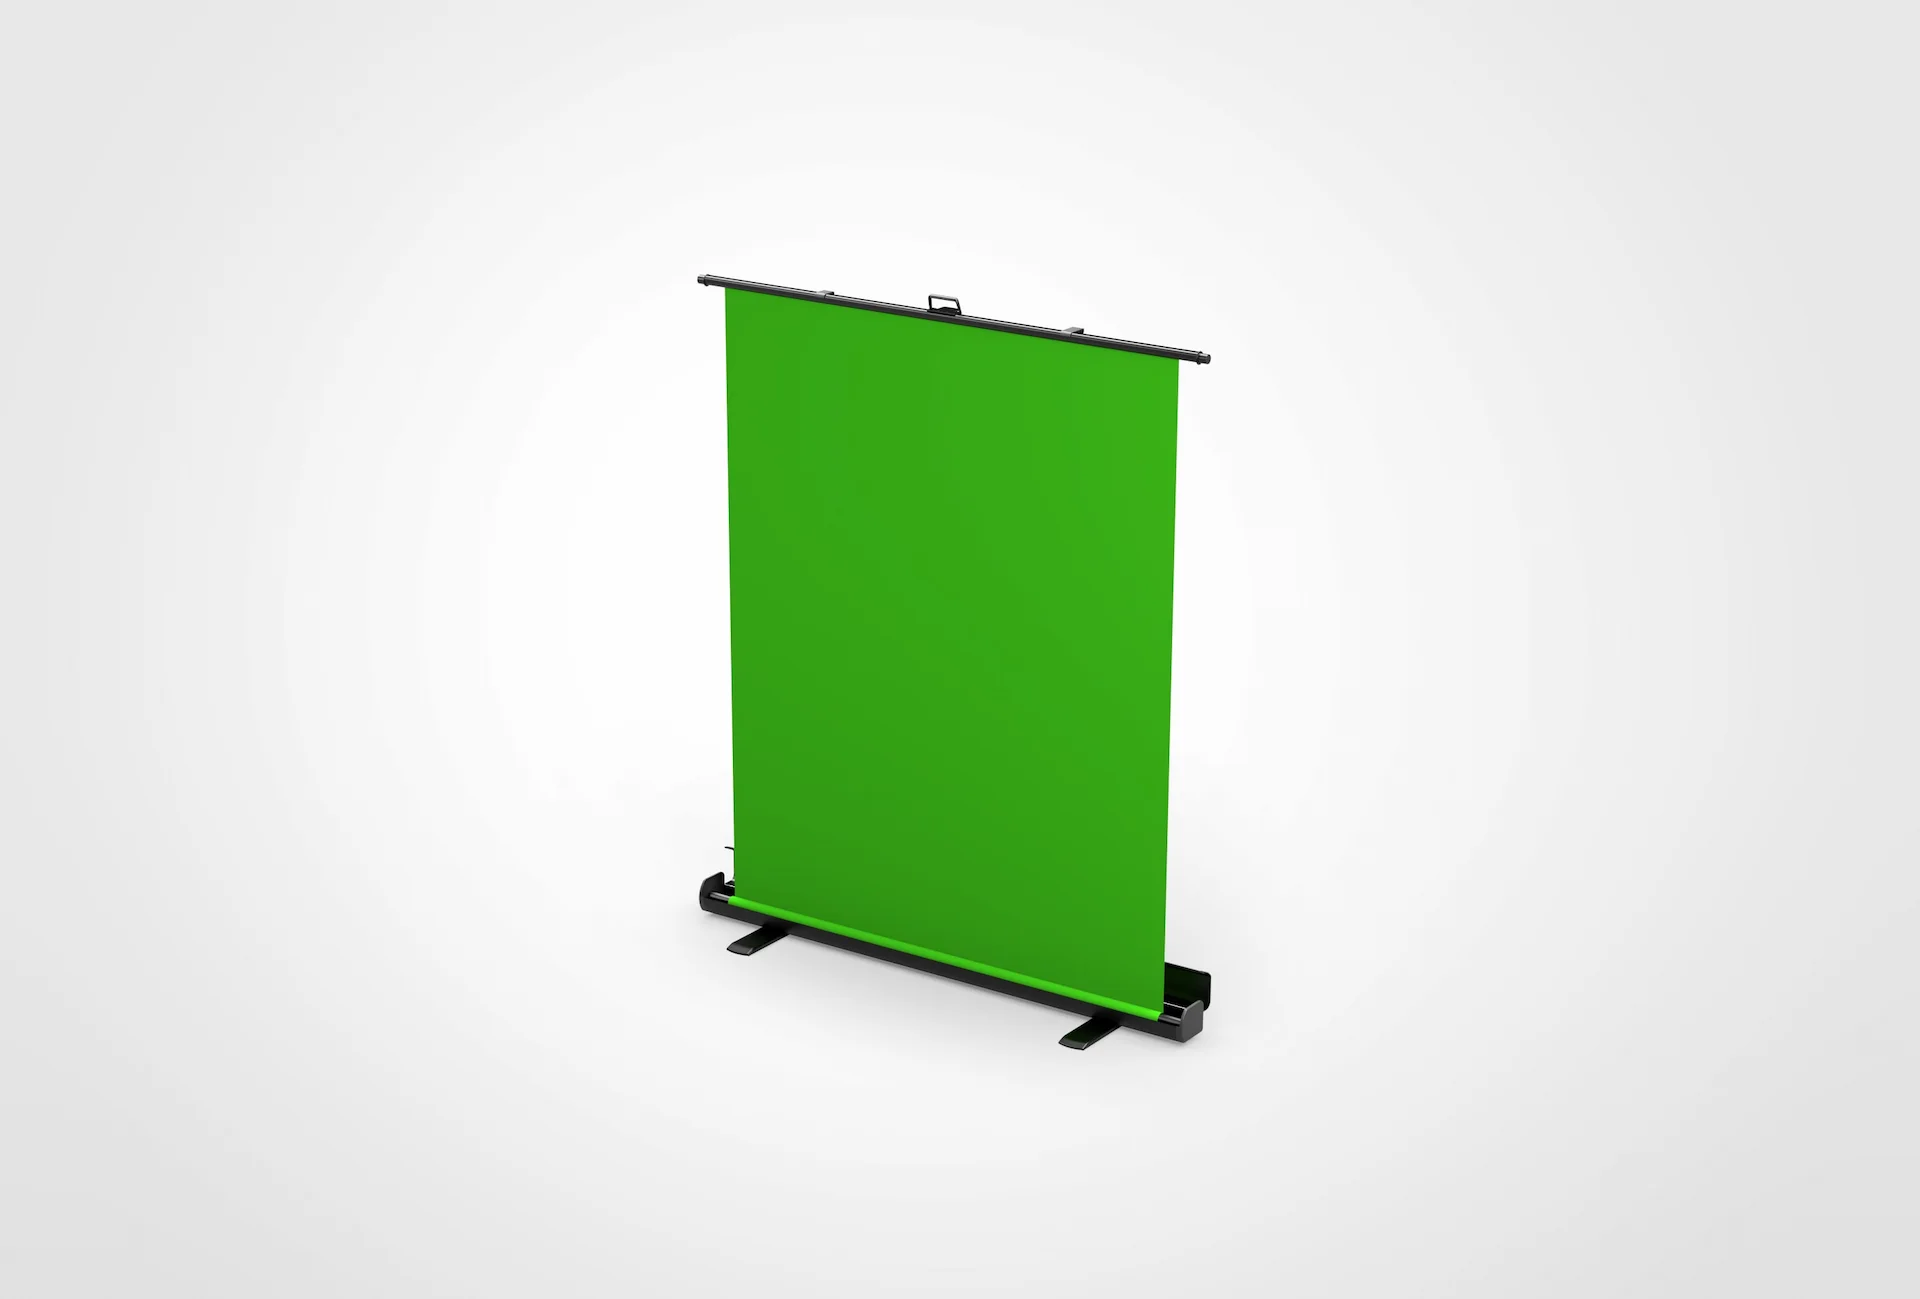 GREEN SCREEN Collapsible Chroma Key Panel